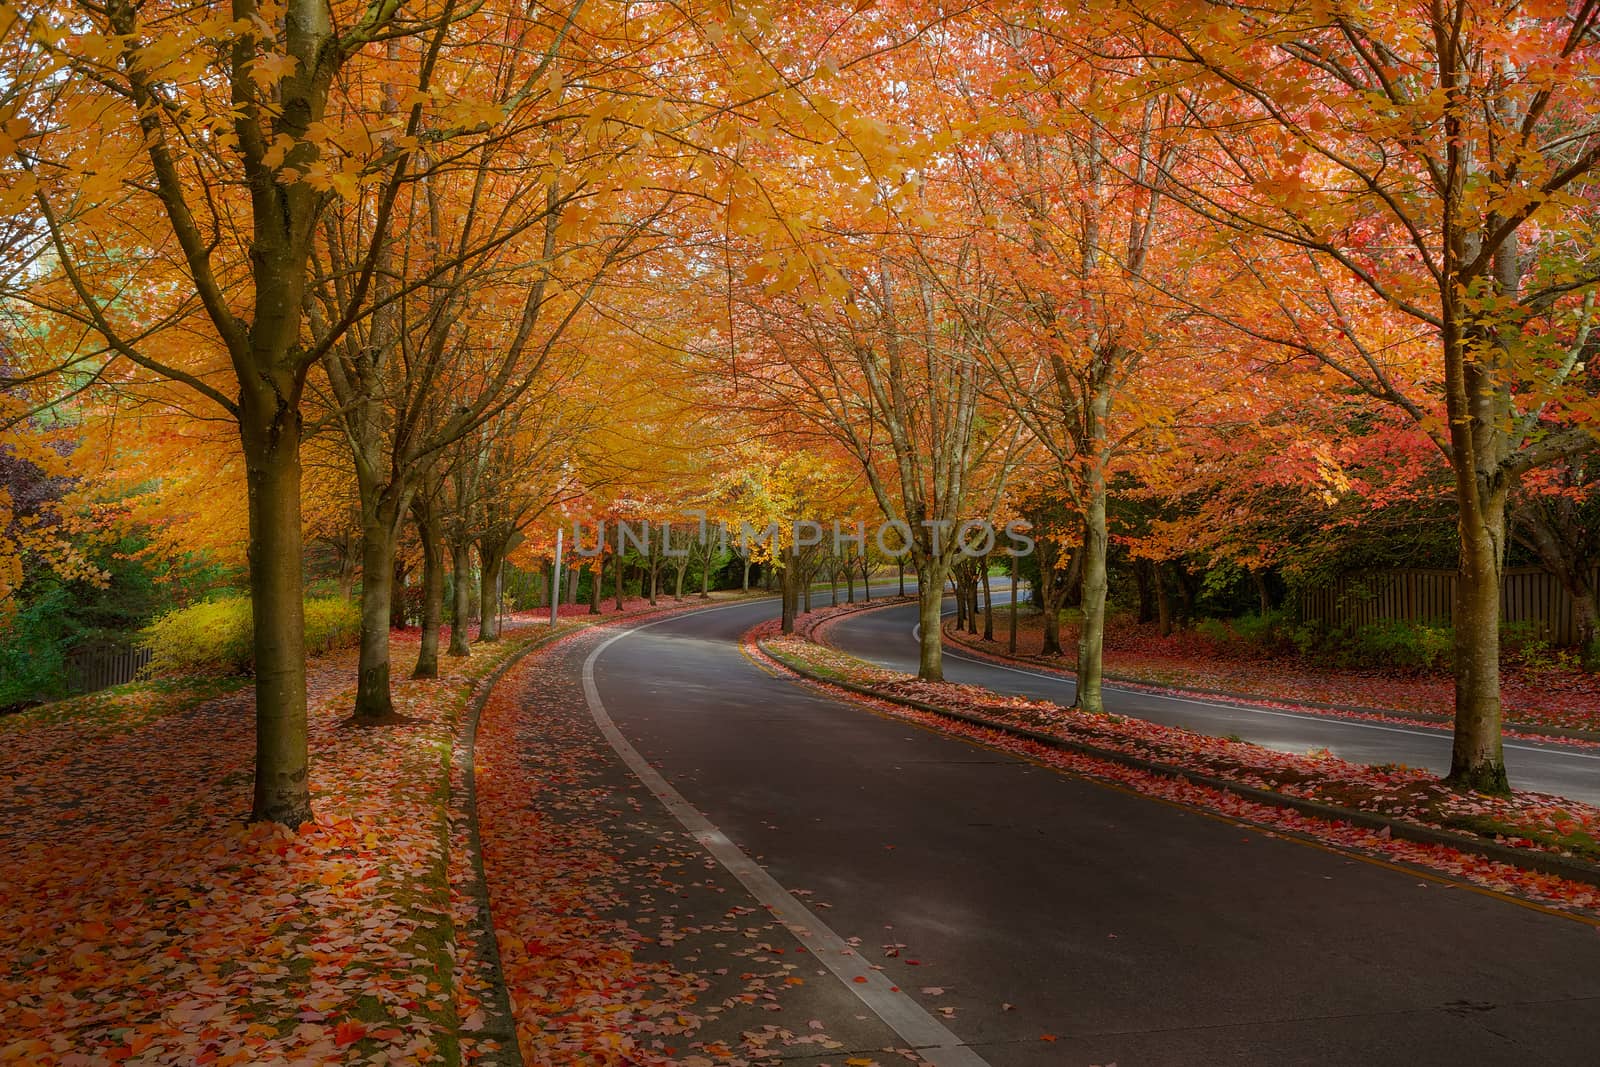 Maple Trees in Fall Colors at Suburban Neighborhood Street by jpldesigns